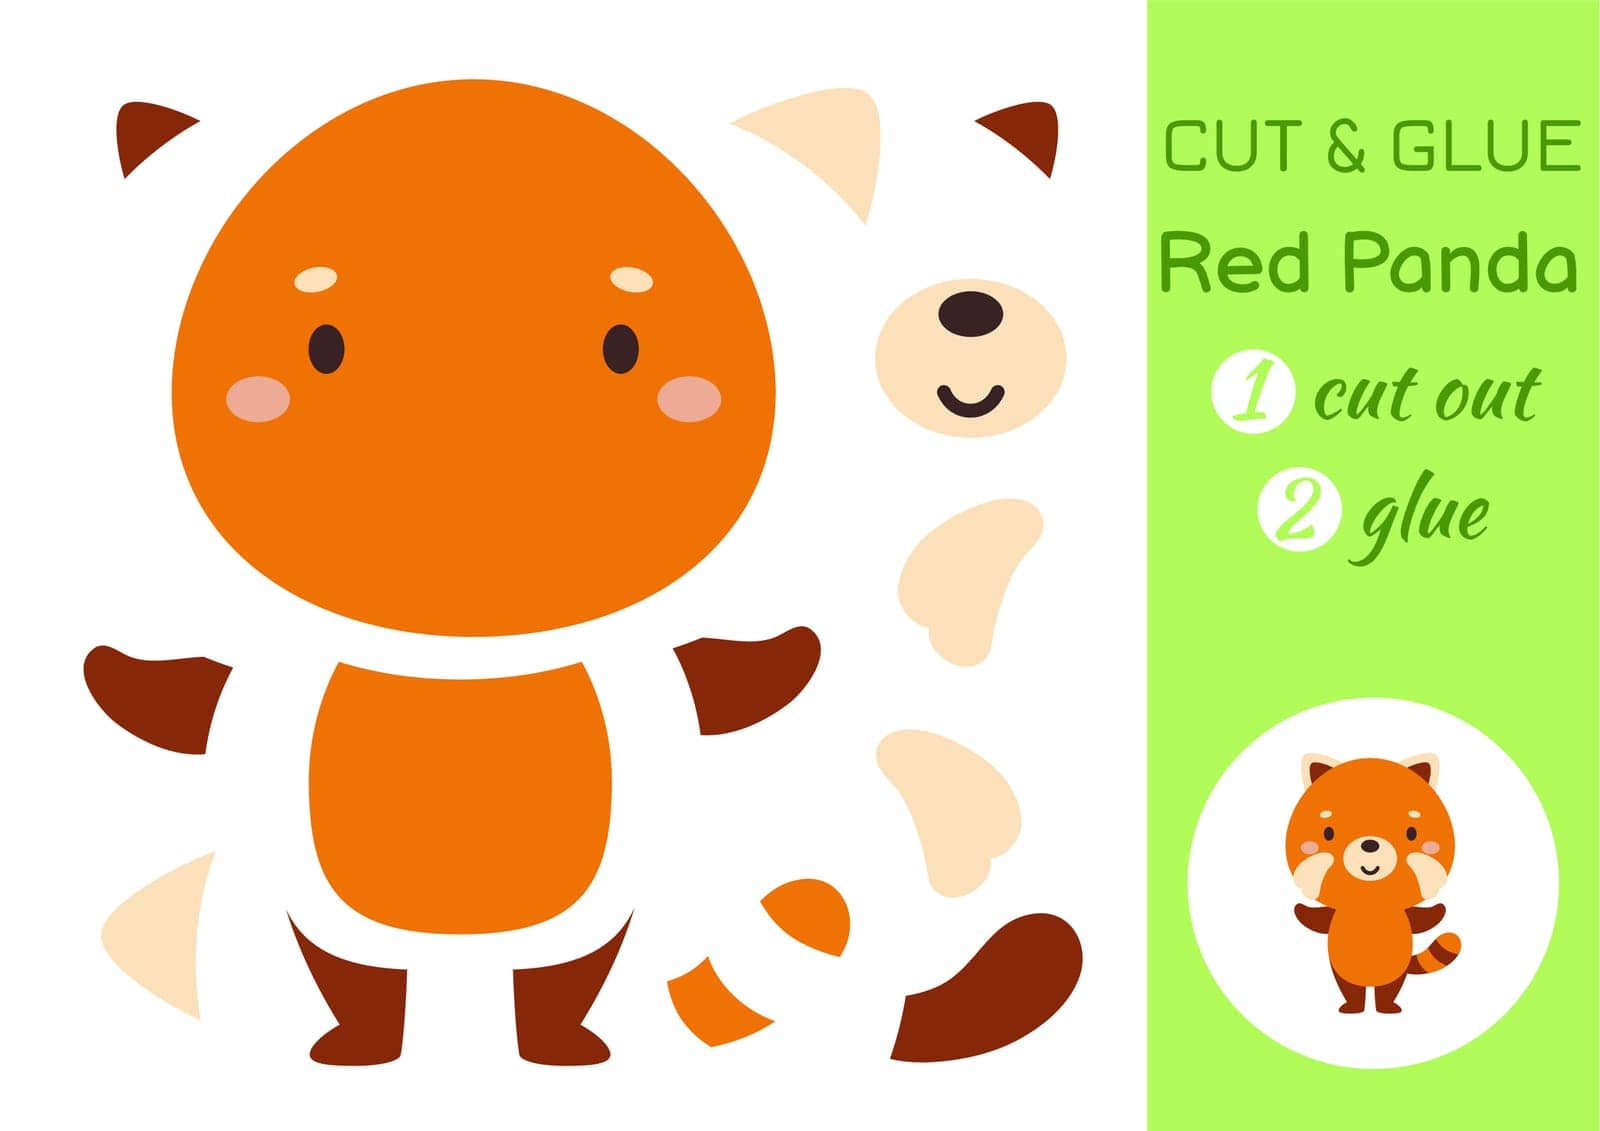 Cut and glue paper little red panda. Kids crafts activity page. Educational game for preschool children. DIY worksheet. Kids art game and activities jigsaw. Vector stock illustration by Melnyk